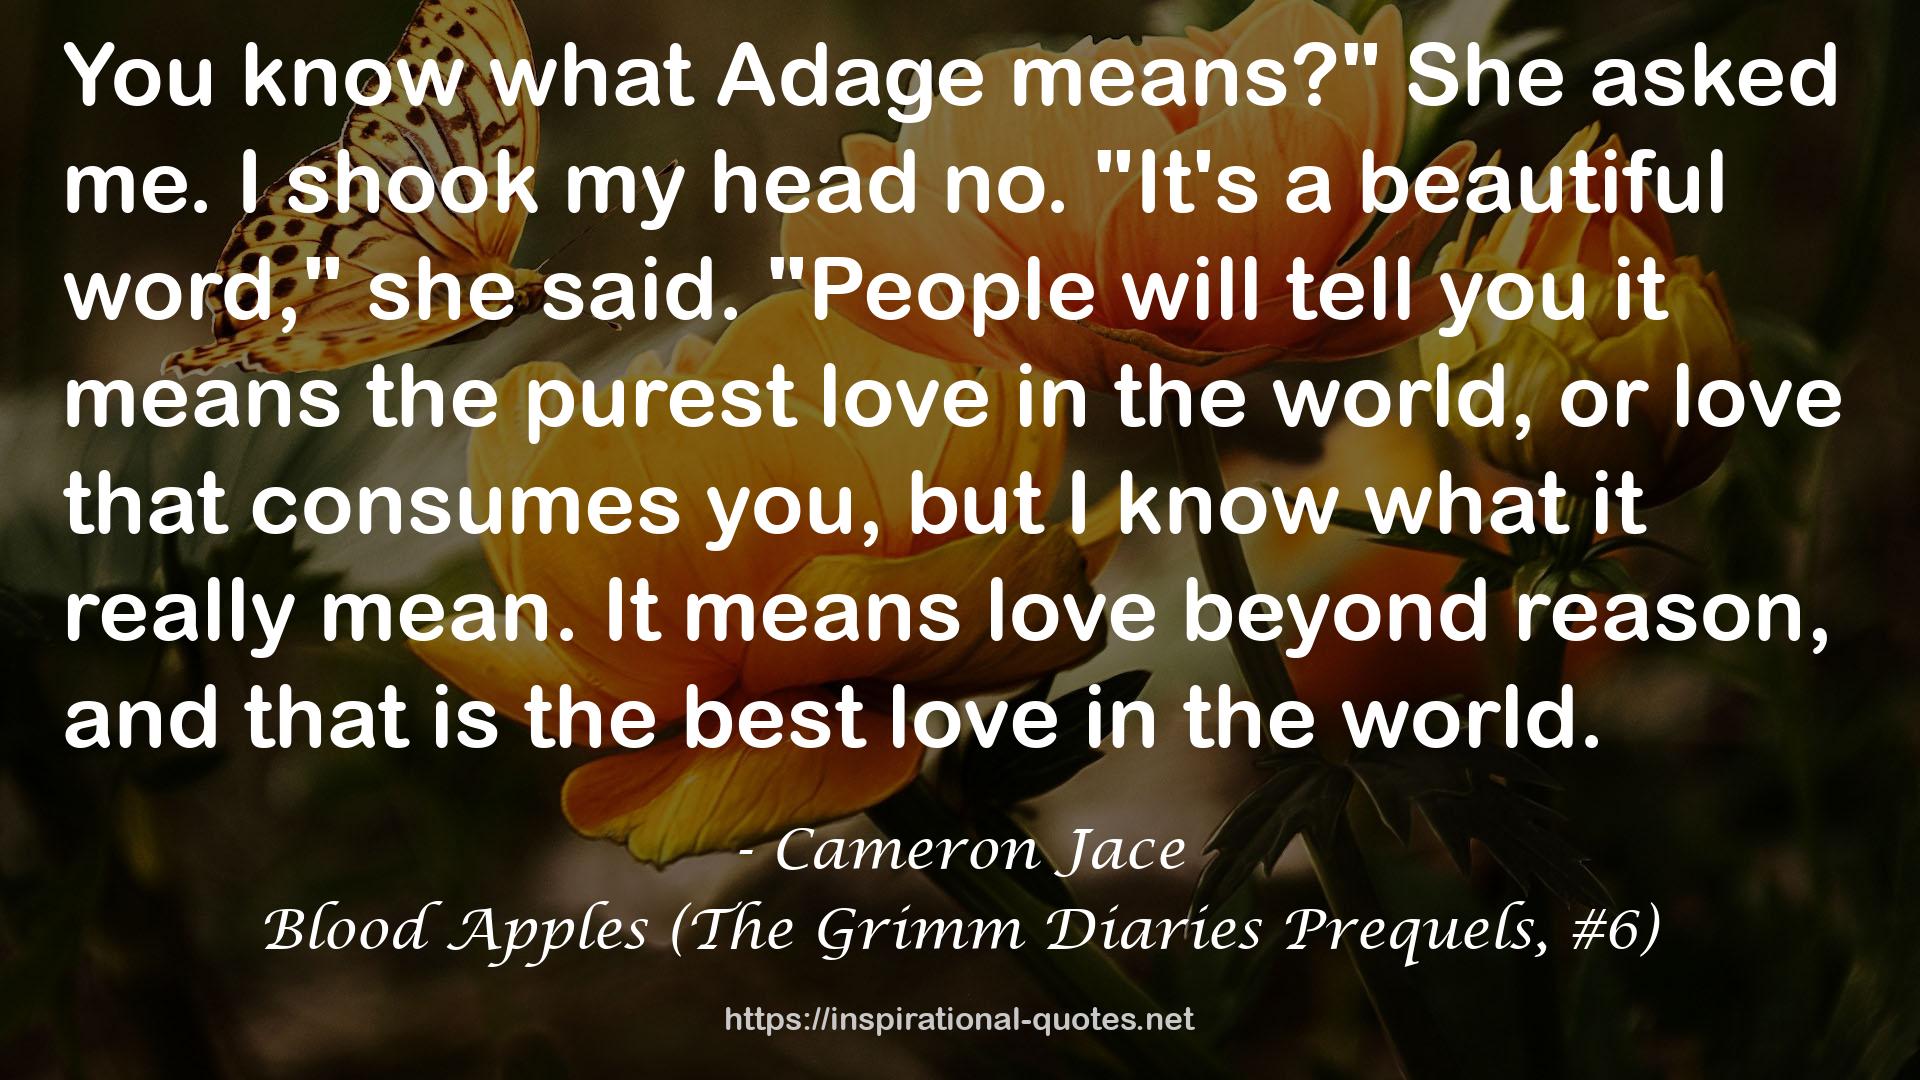 Blood Apples (The Grimm Diaries Prequels, #6) QUOTES